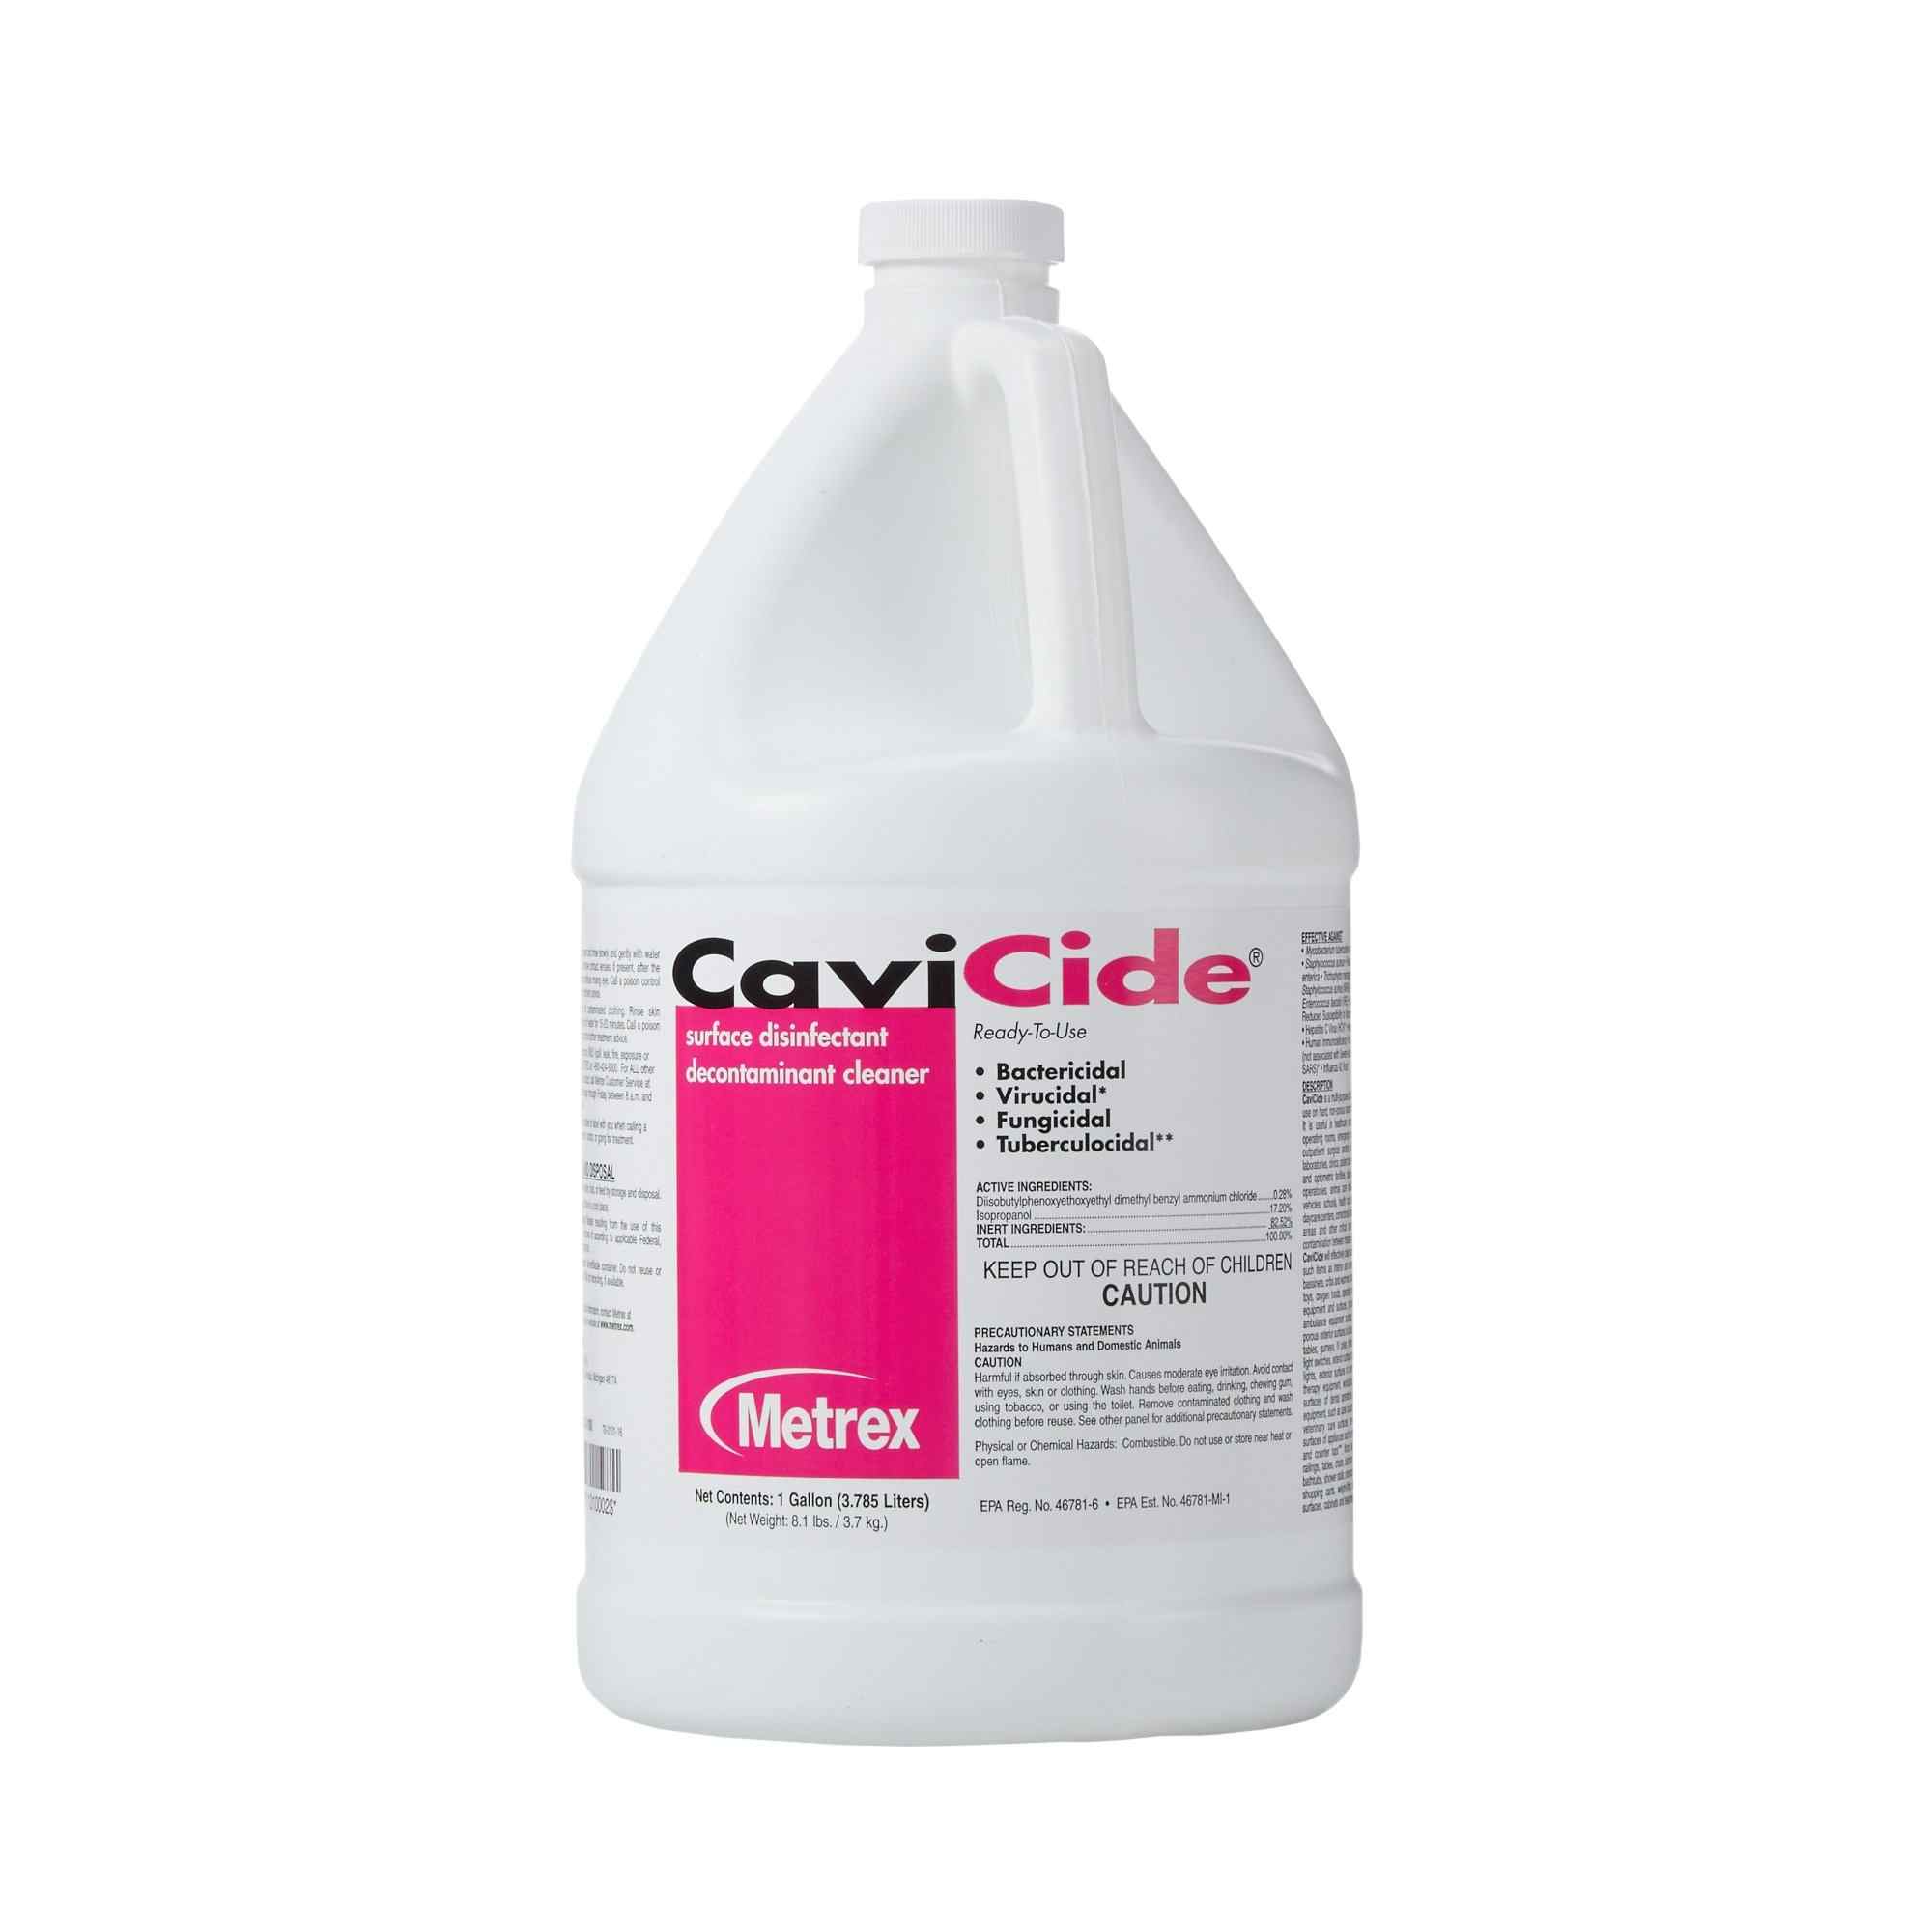 Metrex CaviCide Surface Disinfectant Decontaminant Cleaner, 13-1000, 1 gal. - 1 Each